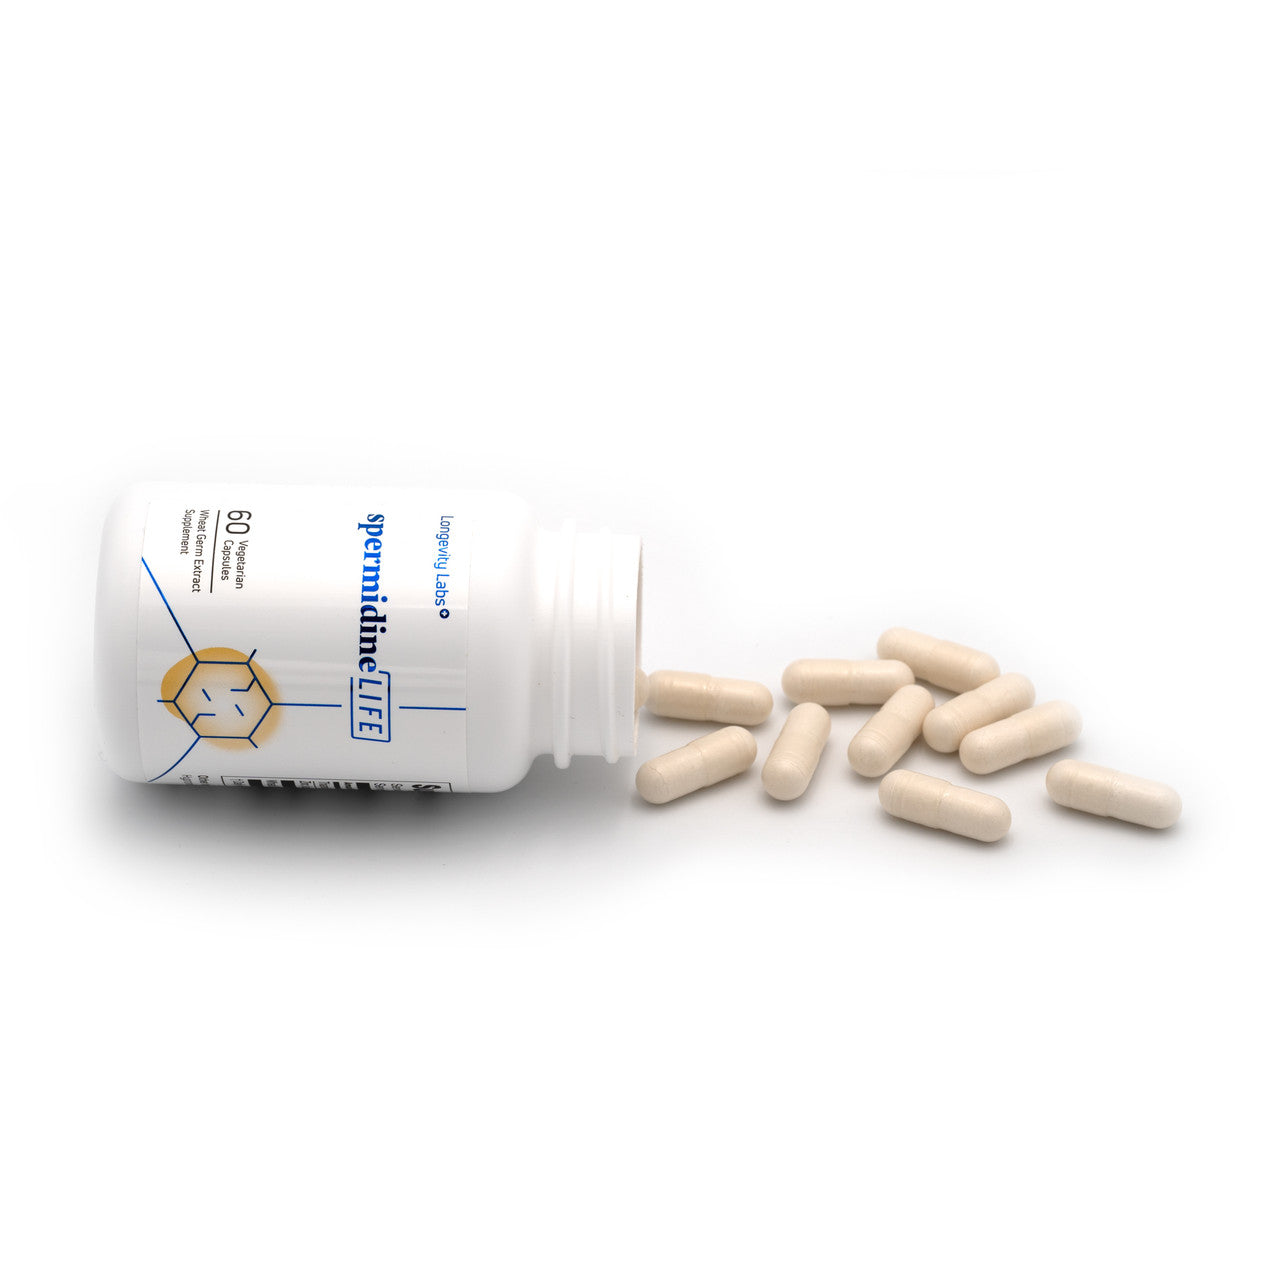 A bottle of spermidineLIFE® Original 800mg Dietary Supplement capsules on a white background.